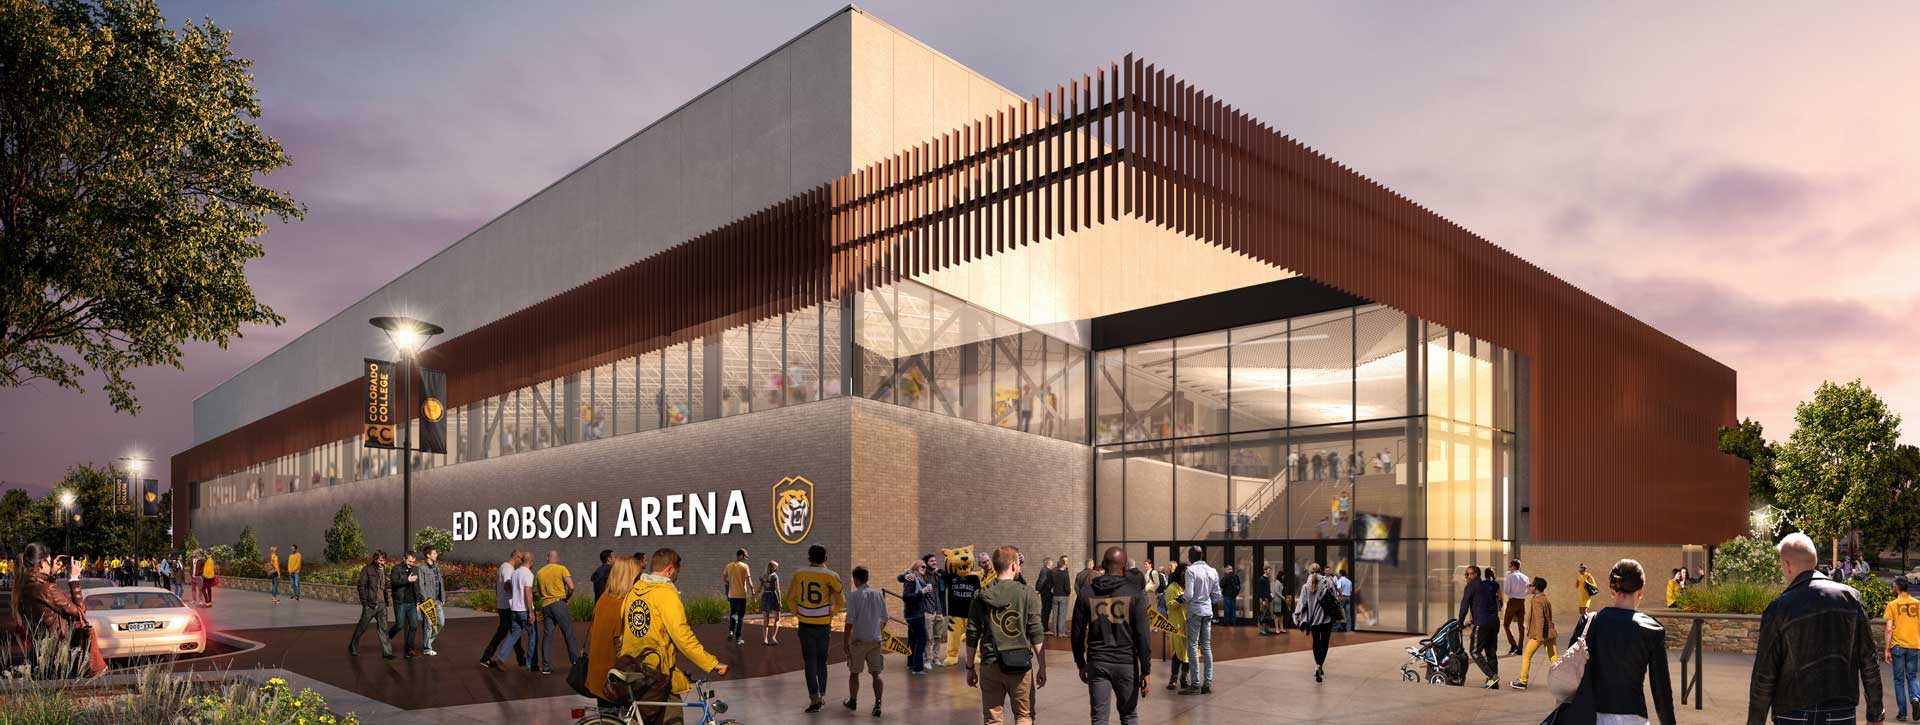 North side entry of Ed Robson Arena; architectural rendering by JLG Architects